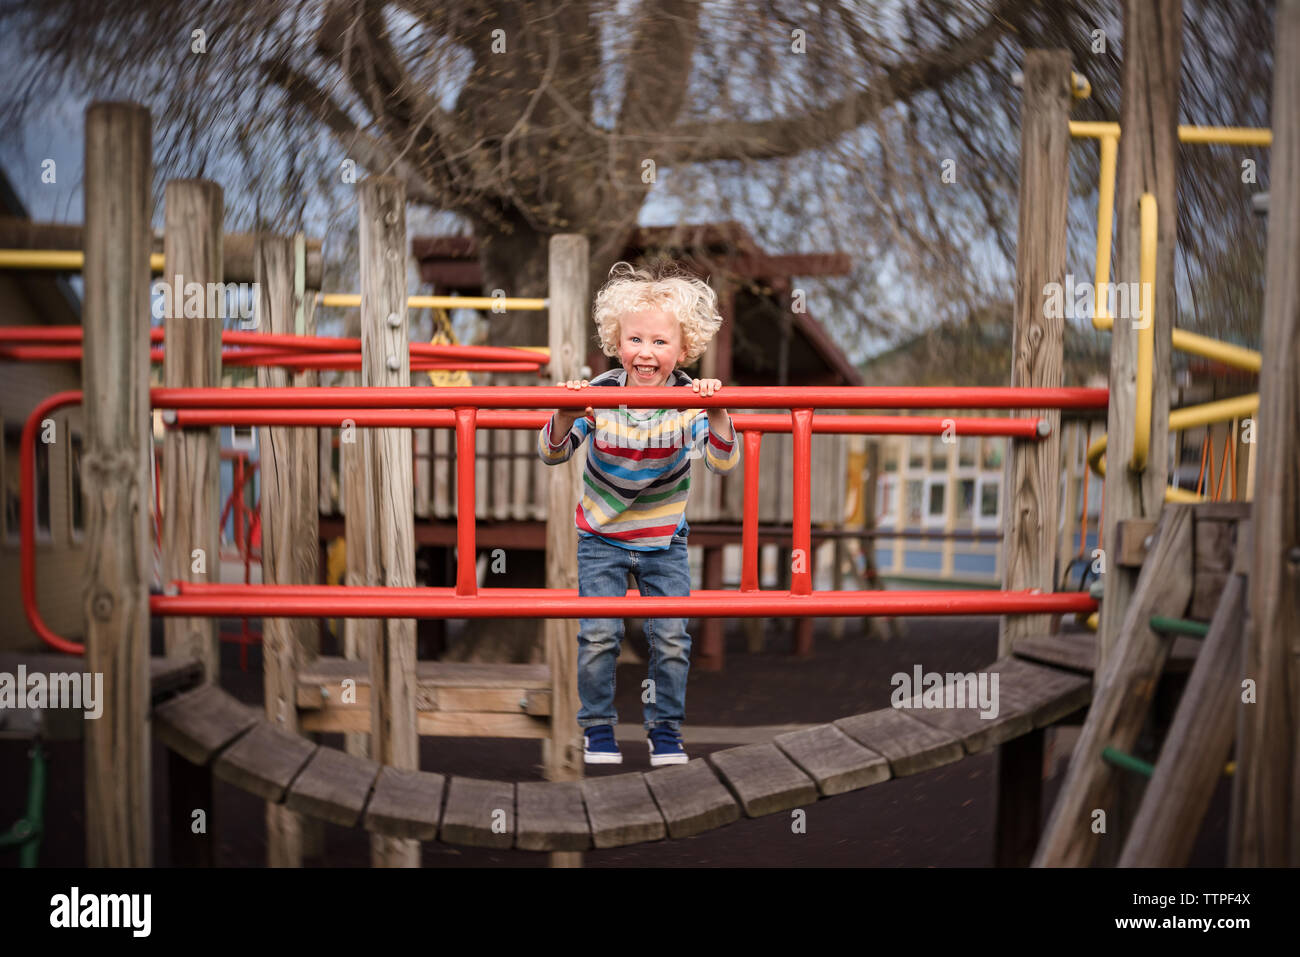 Happy active toddler jumping on colorful playground structure Stock Photo